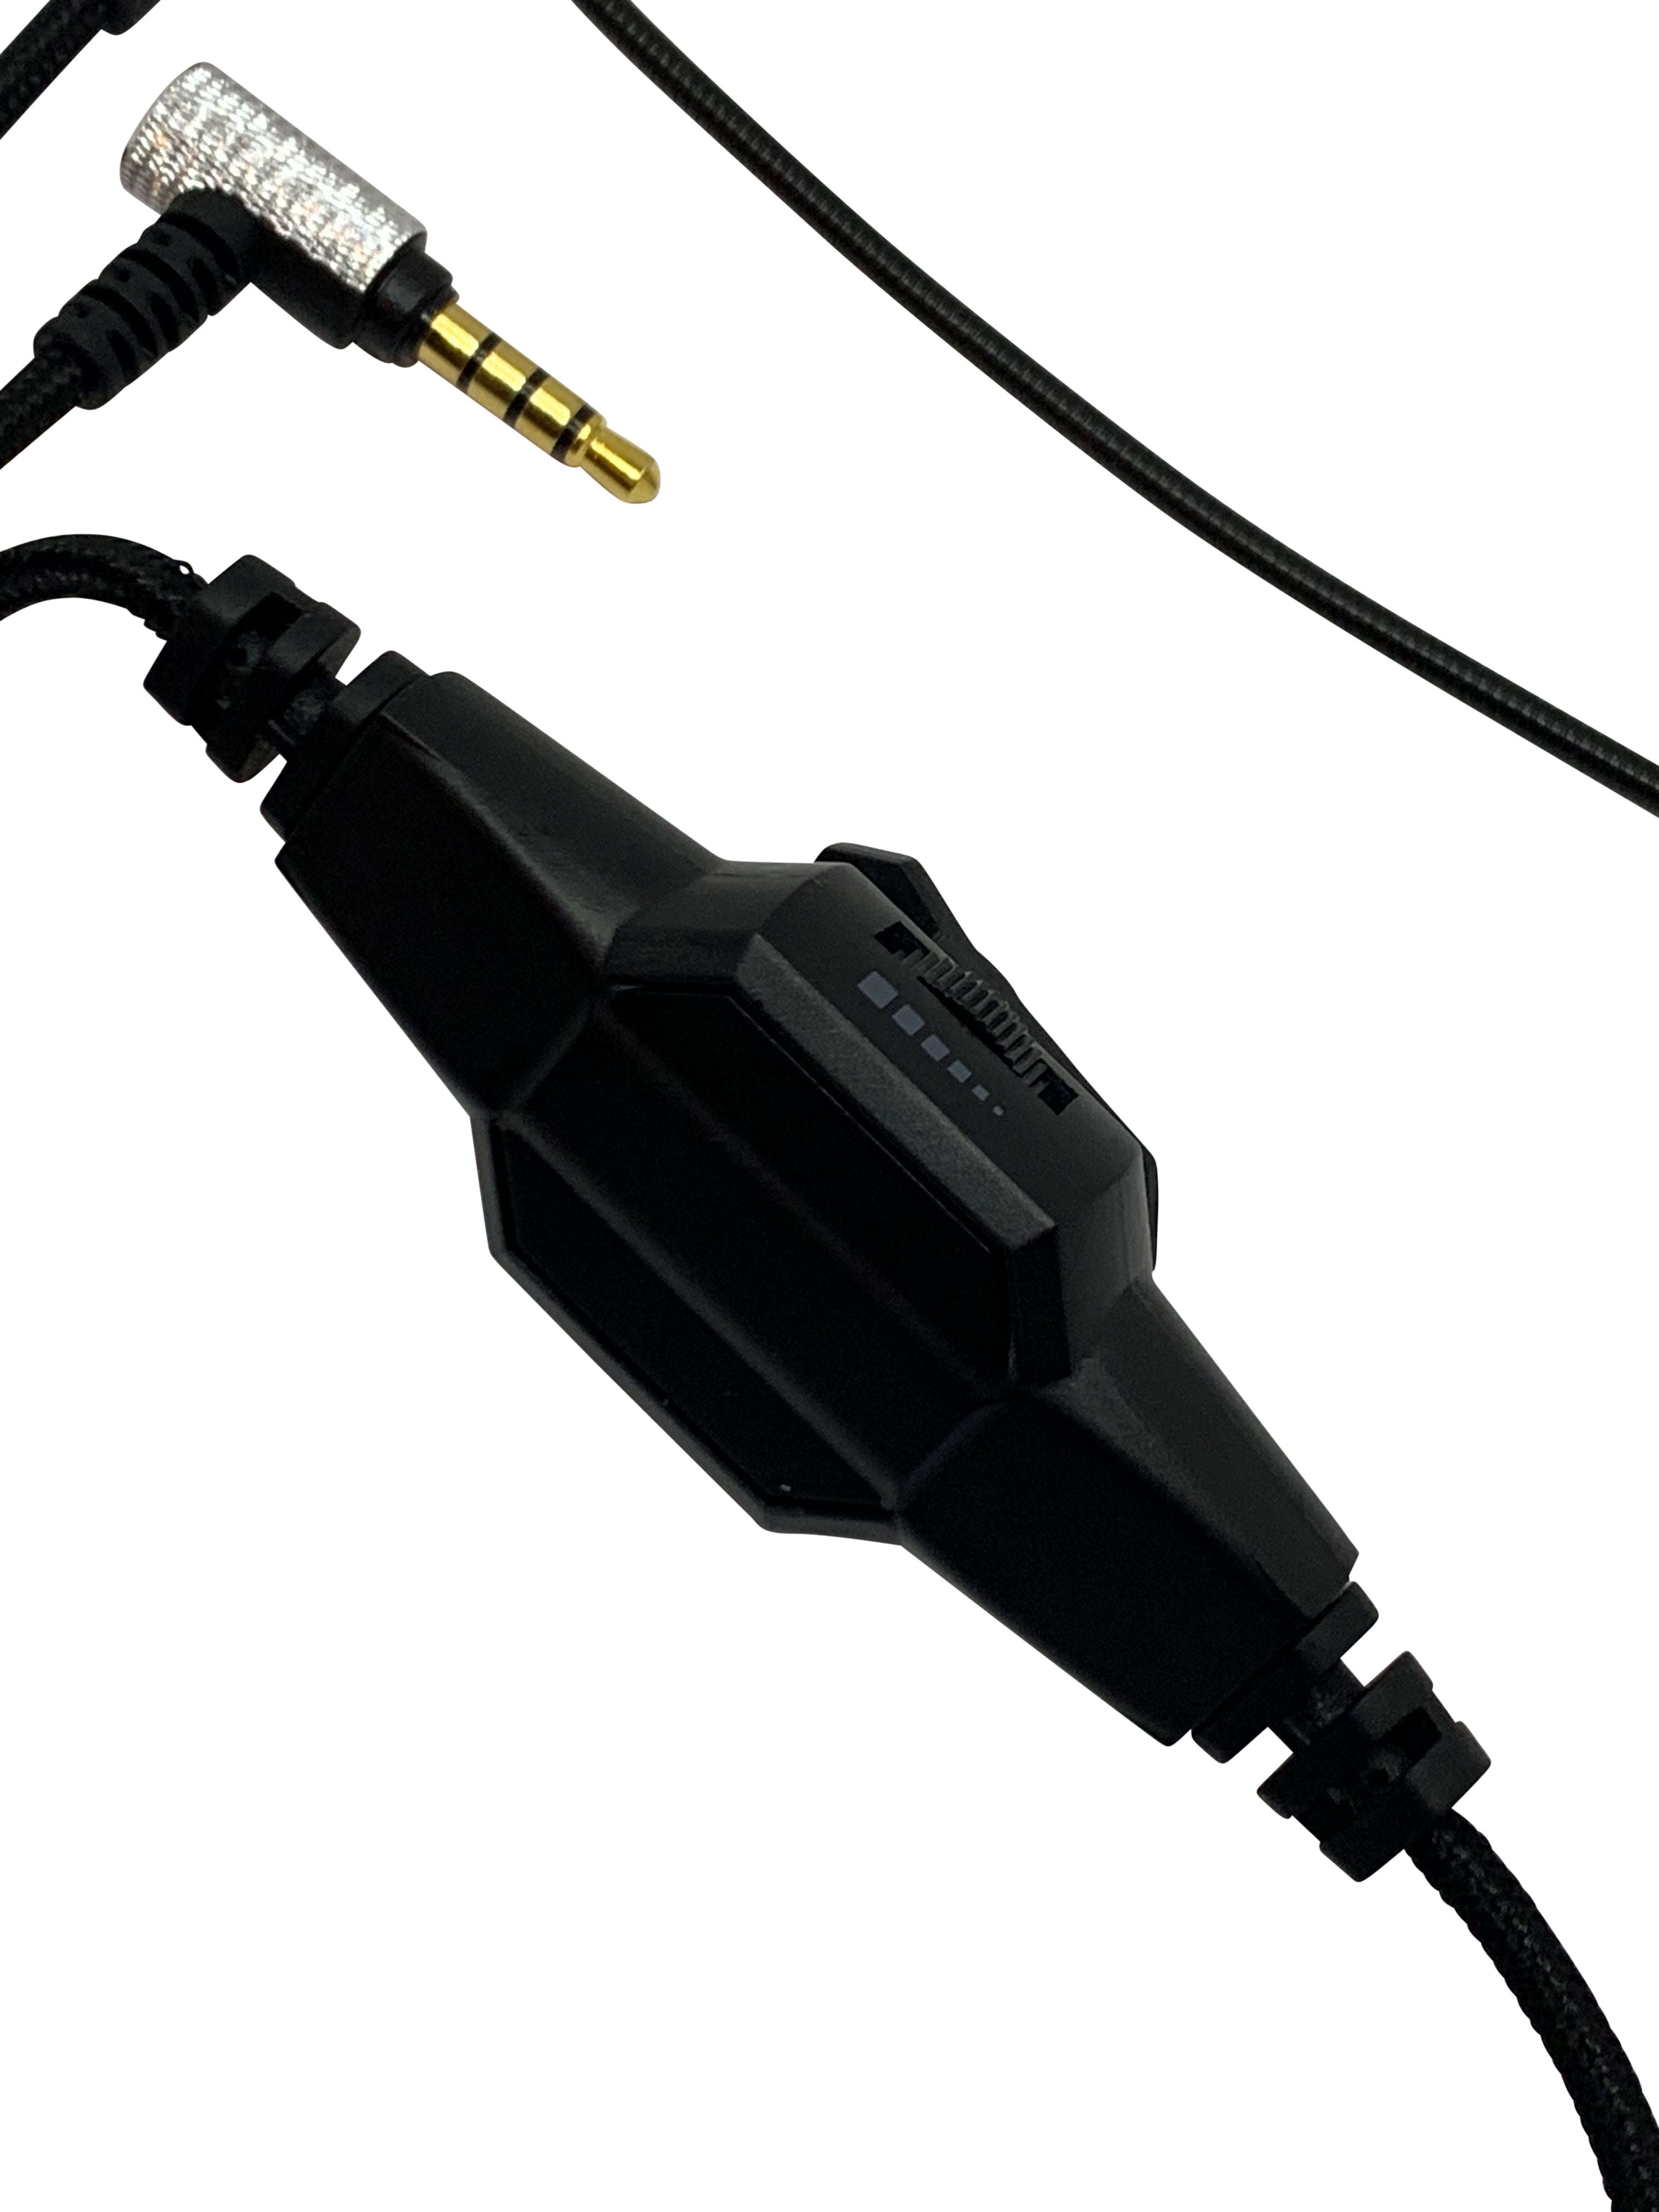 CentralSound Gaming Headset Mic Boom Adapter Cord for Beats Headphones - CentralSound